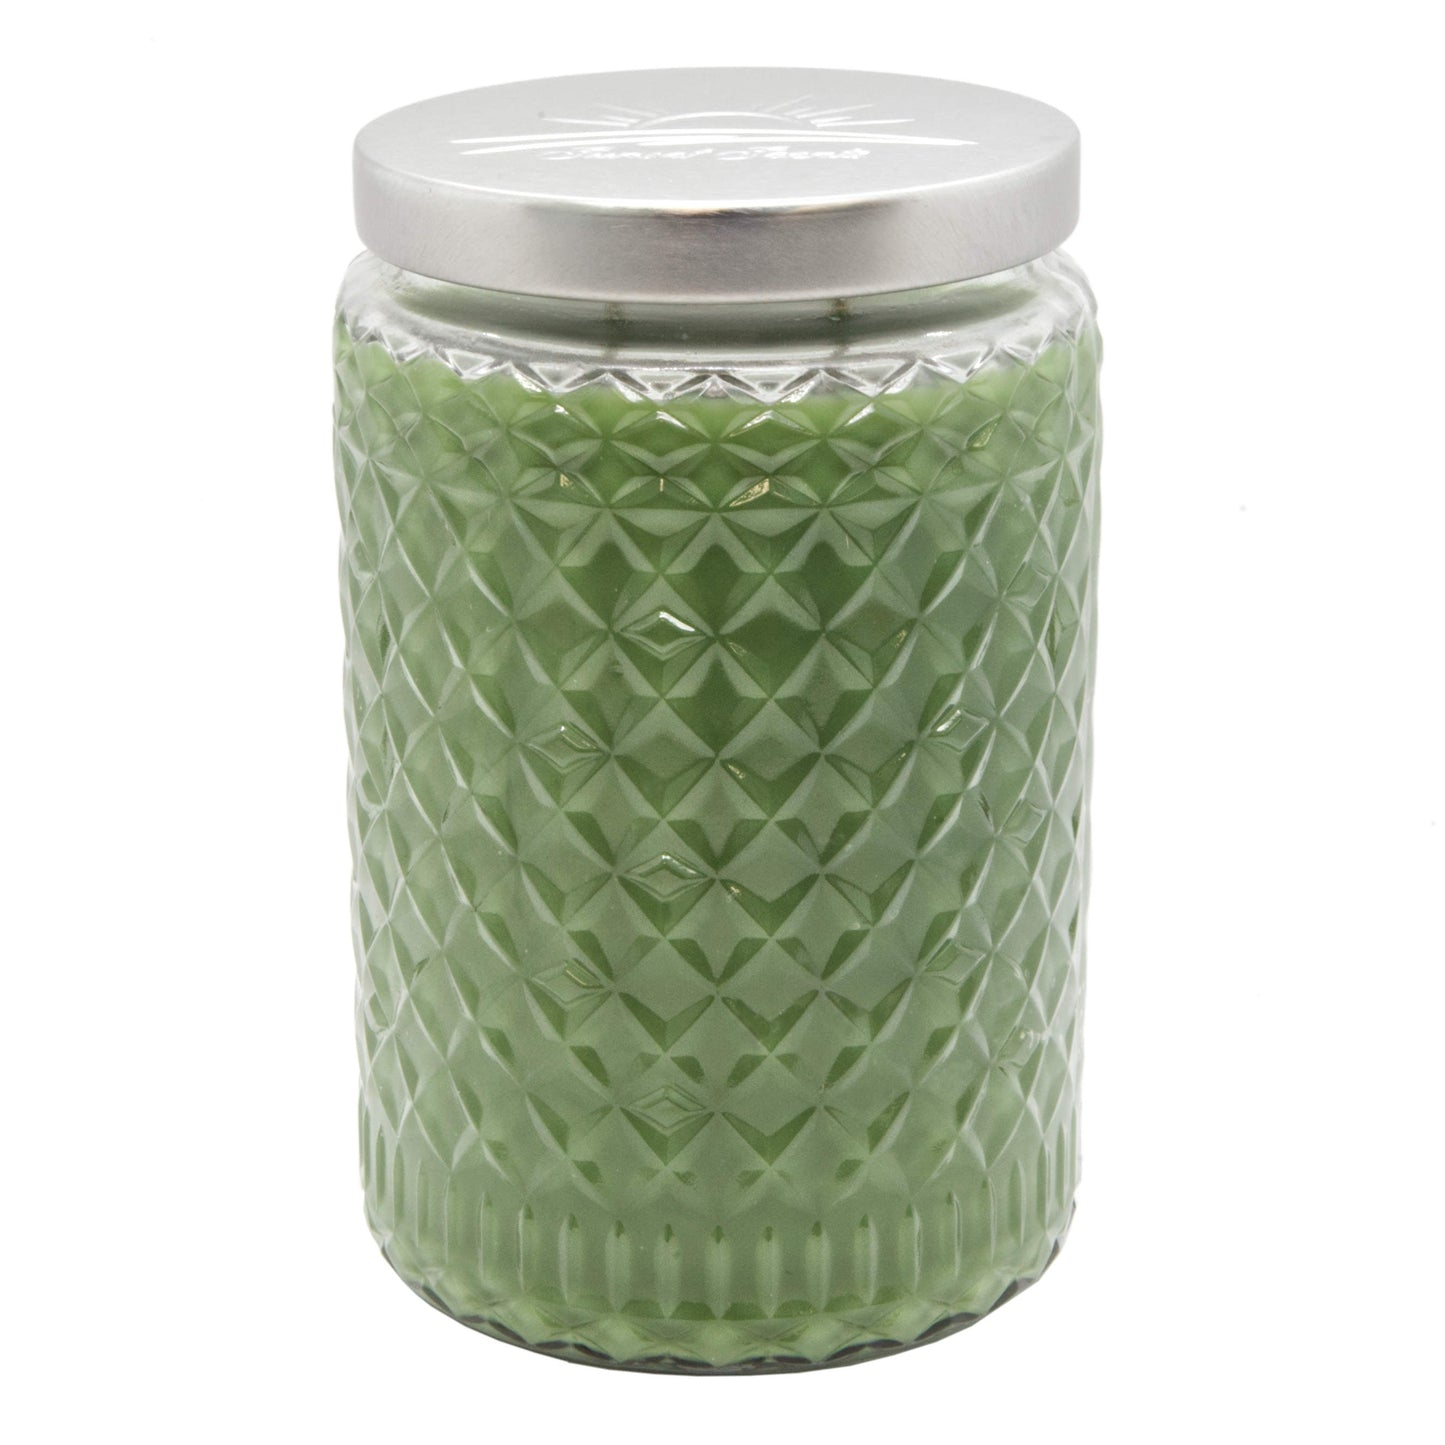 Fall Leaves Scented Candle